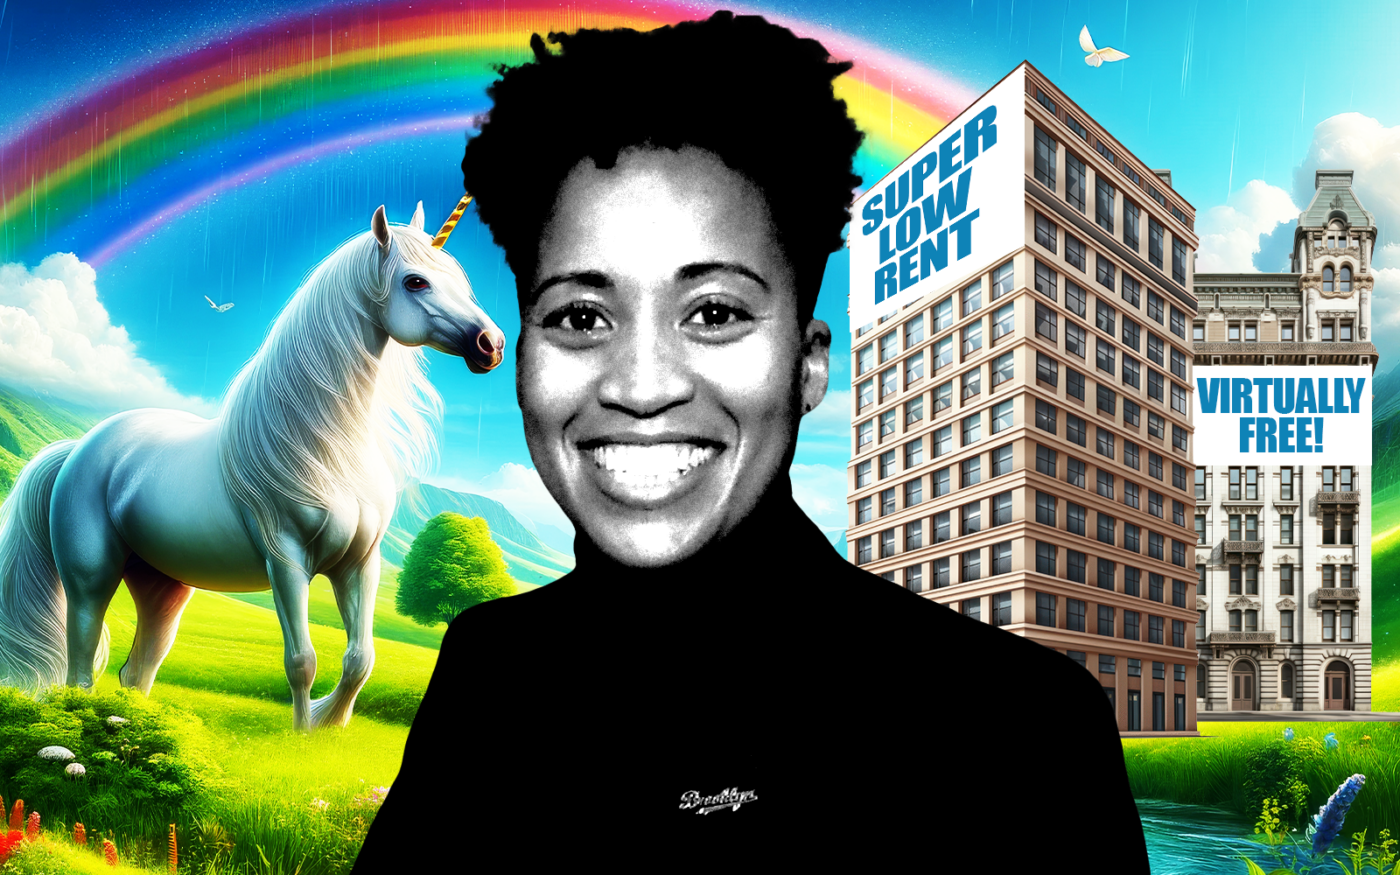 Crystal Hudson Stops Brooklyn Housing With Impossible Demands